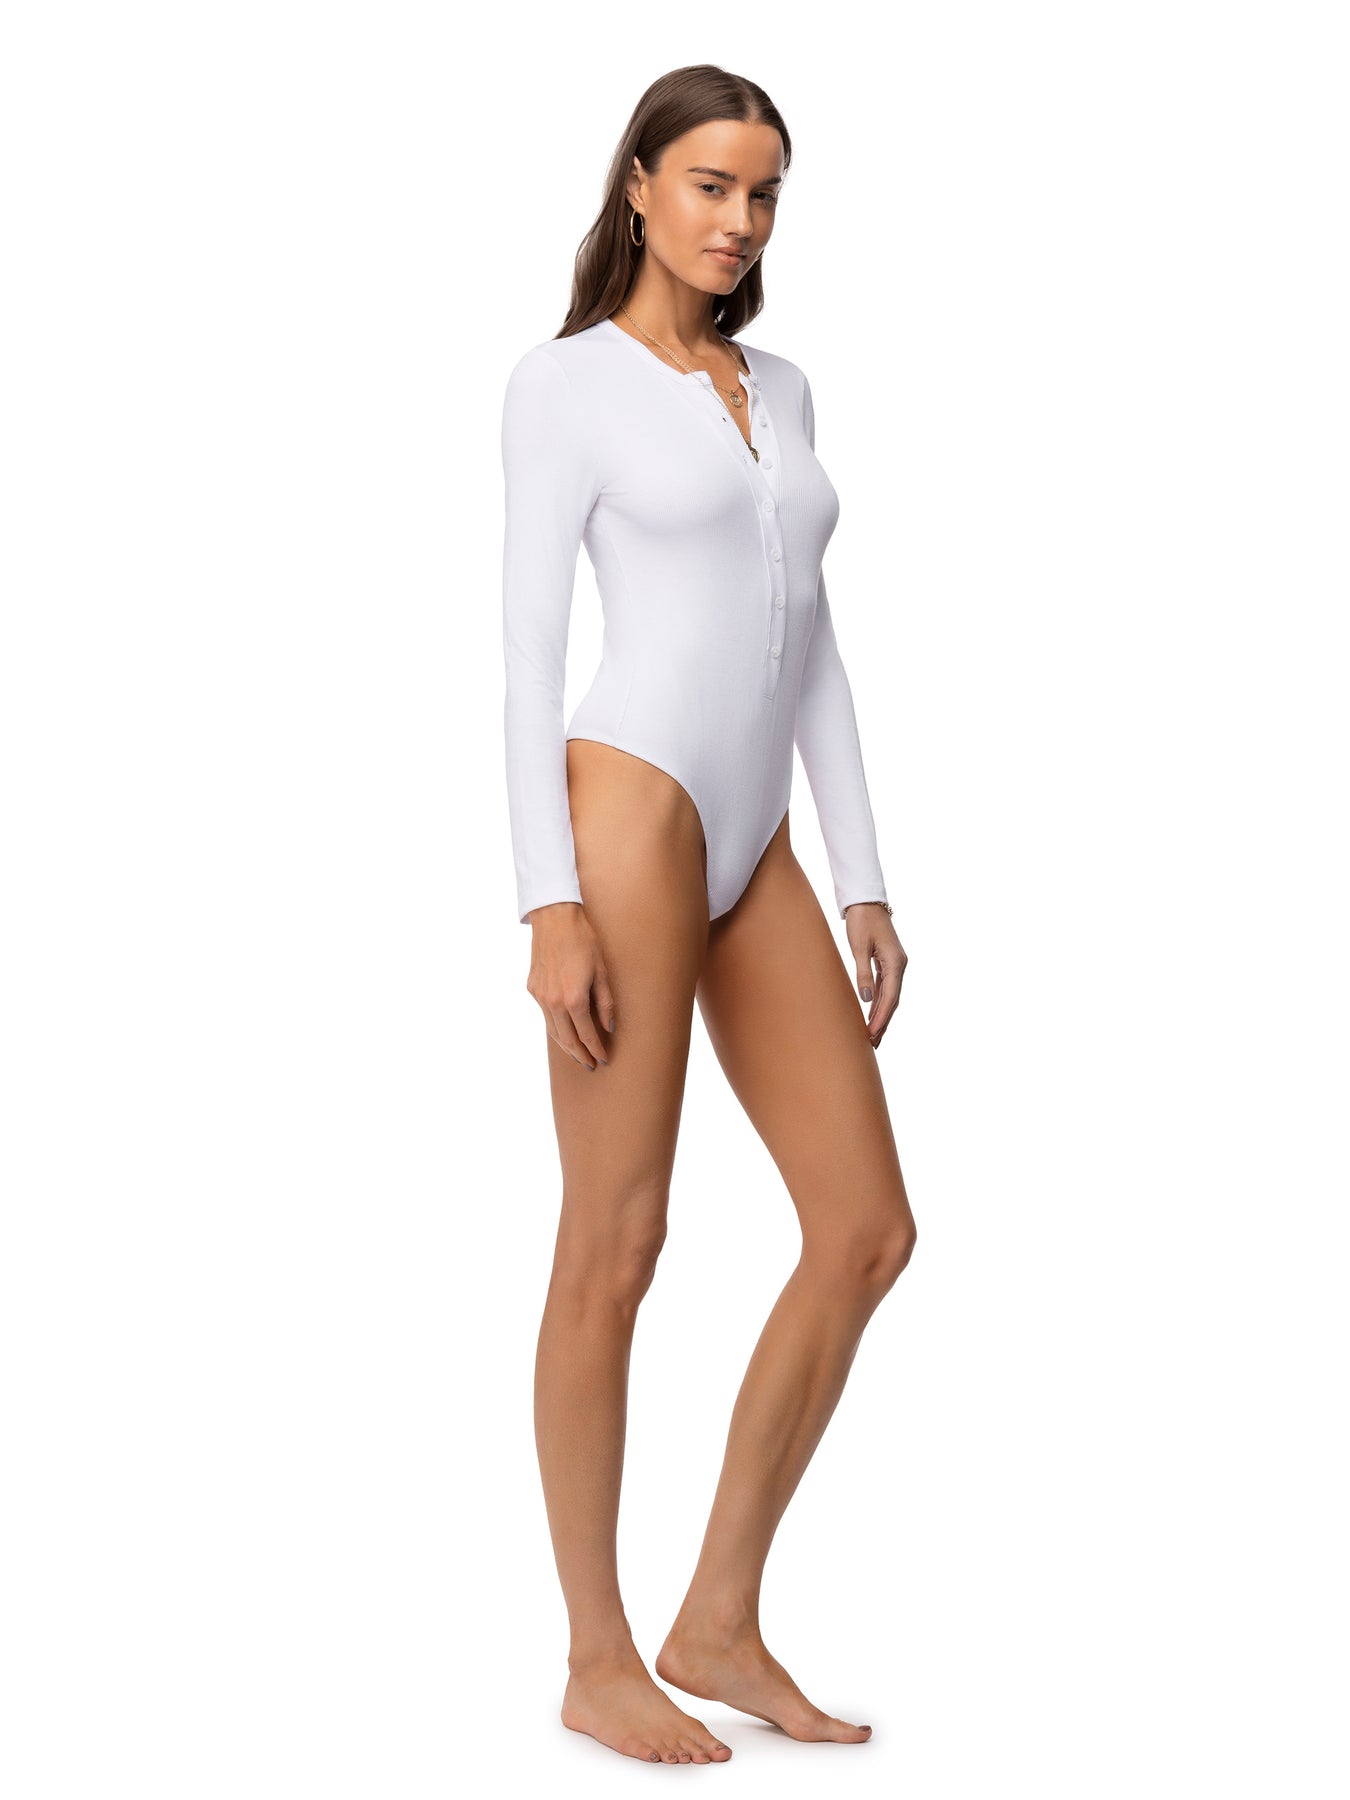 Alluro White Snatched Body Suit Size M - $12 (61% Off Retail) New With Tags  - From Liza